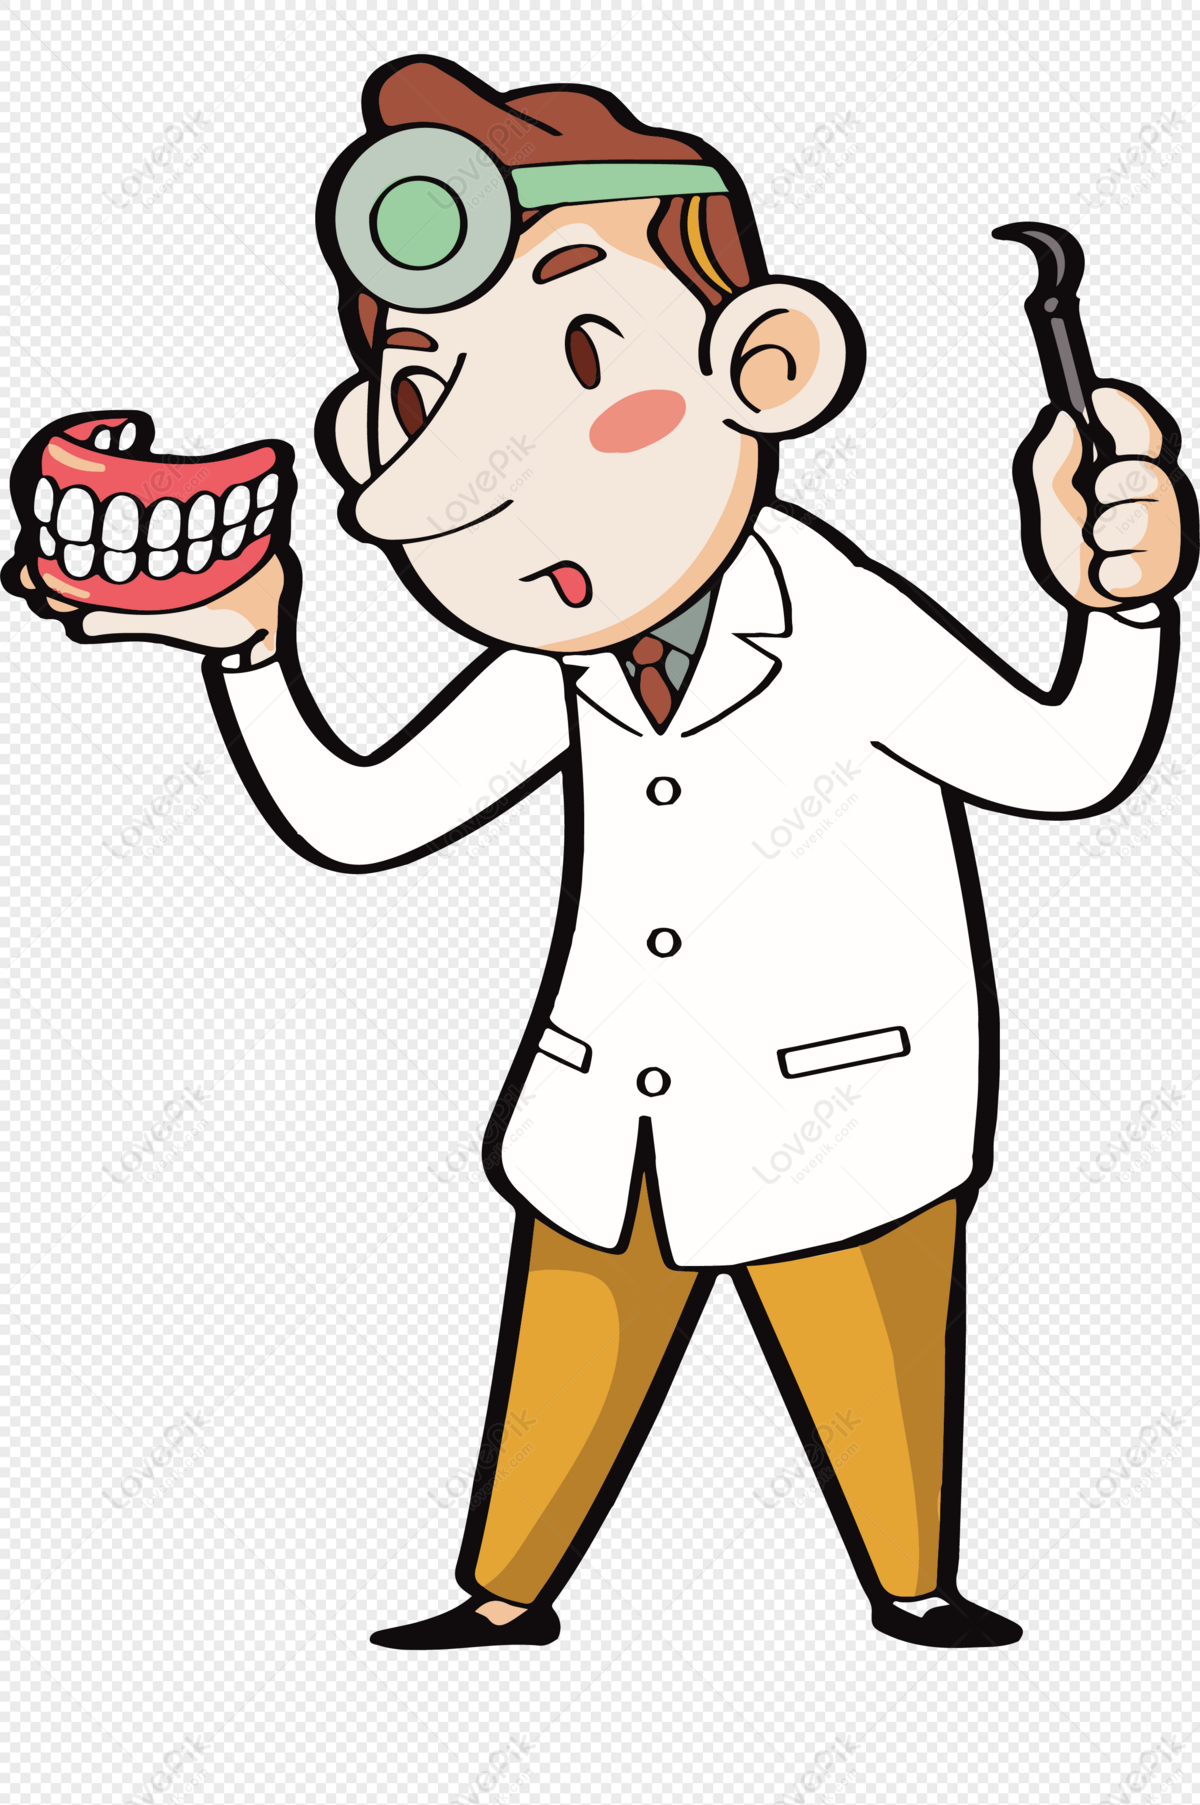 Dentist PNG Image And Clipart Image For Free Download - Lovepik | 400735318